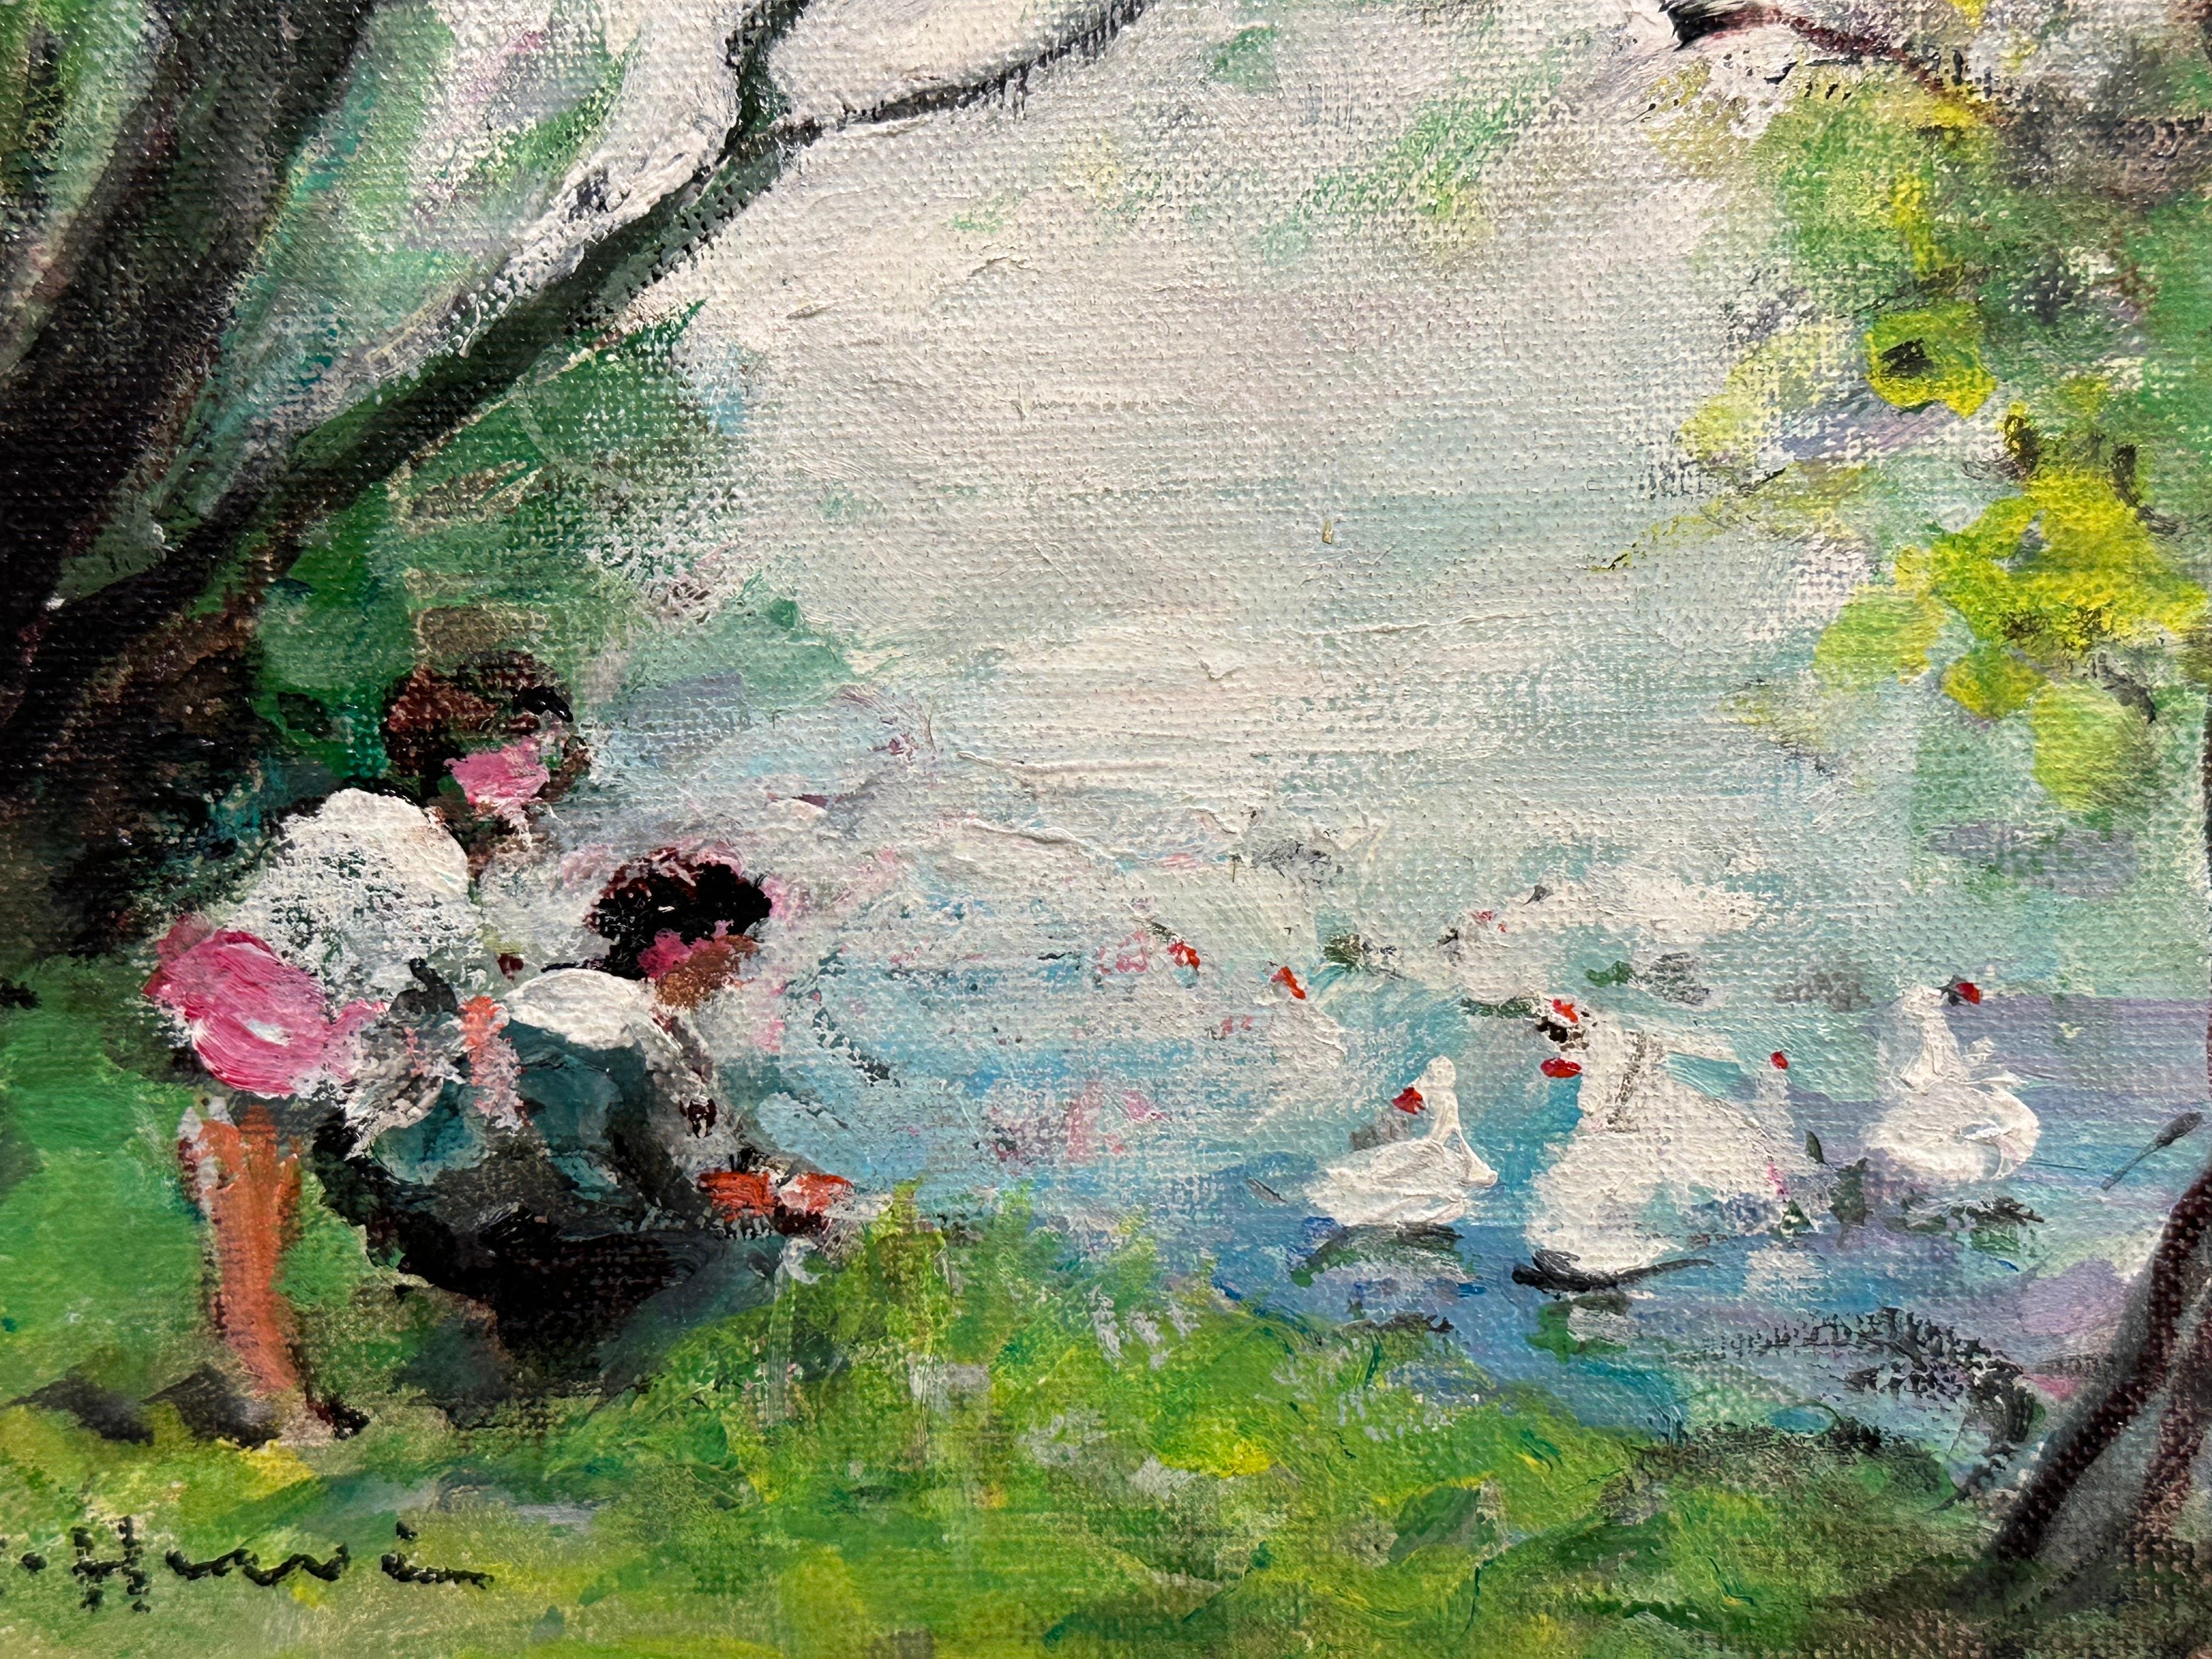 Feeding the Ducks
by Jules Rene Herve (1887-1981) French, signed front and back
oil painting on canvas, framed
canvas: 9 x 11 inches
framed: 15 x 16.5 inches

Provenance: private collection, UK

Condition: very good and ready to hang